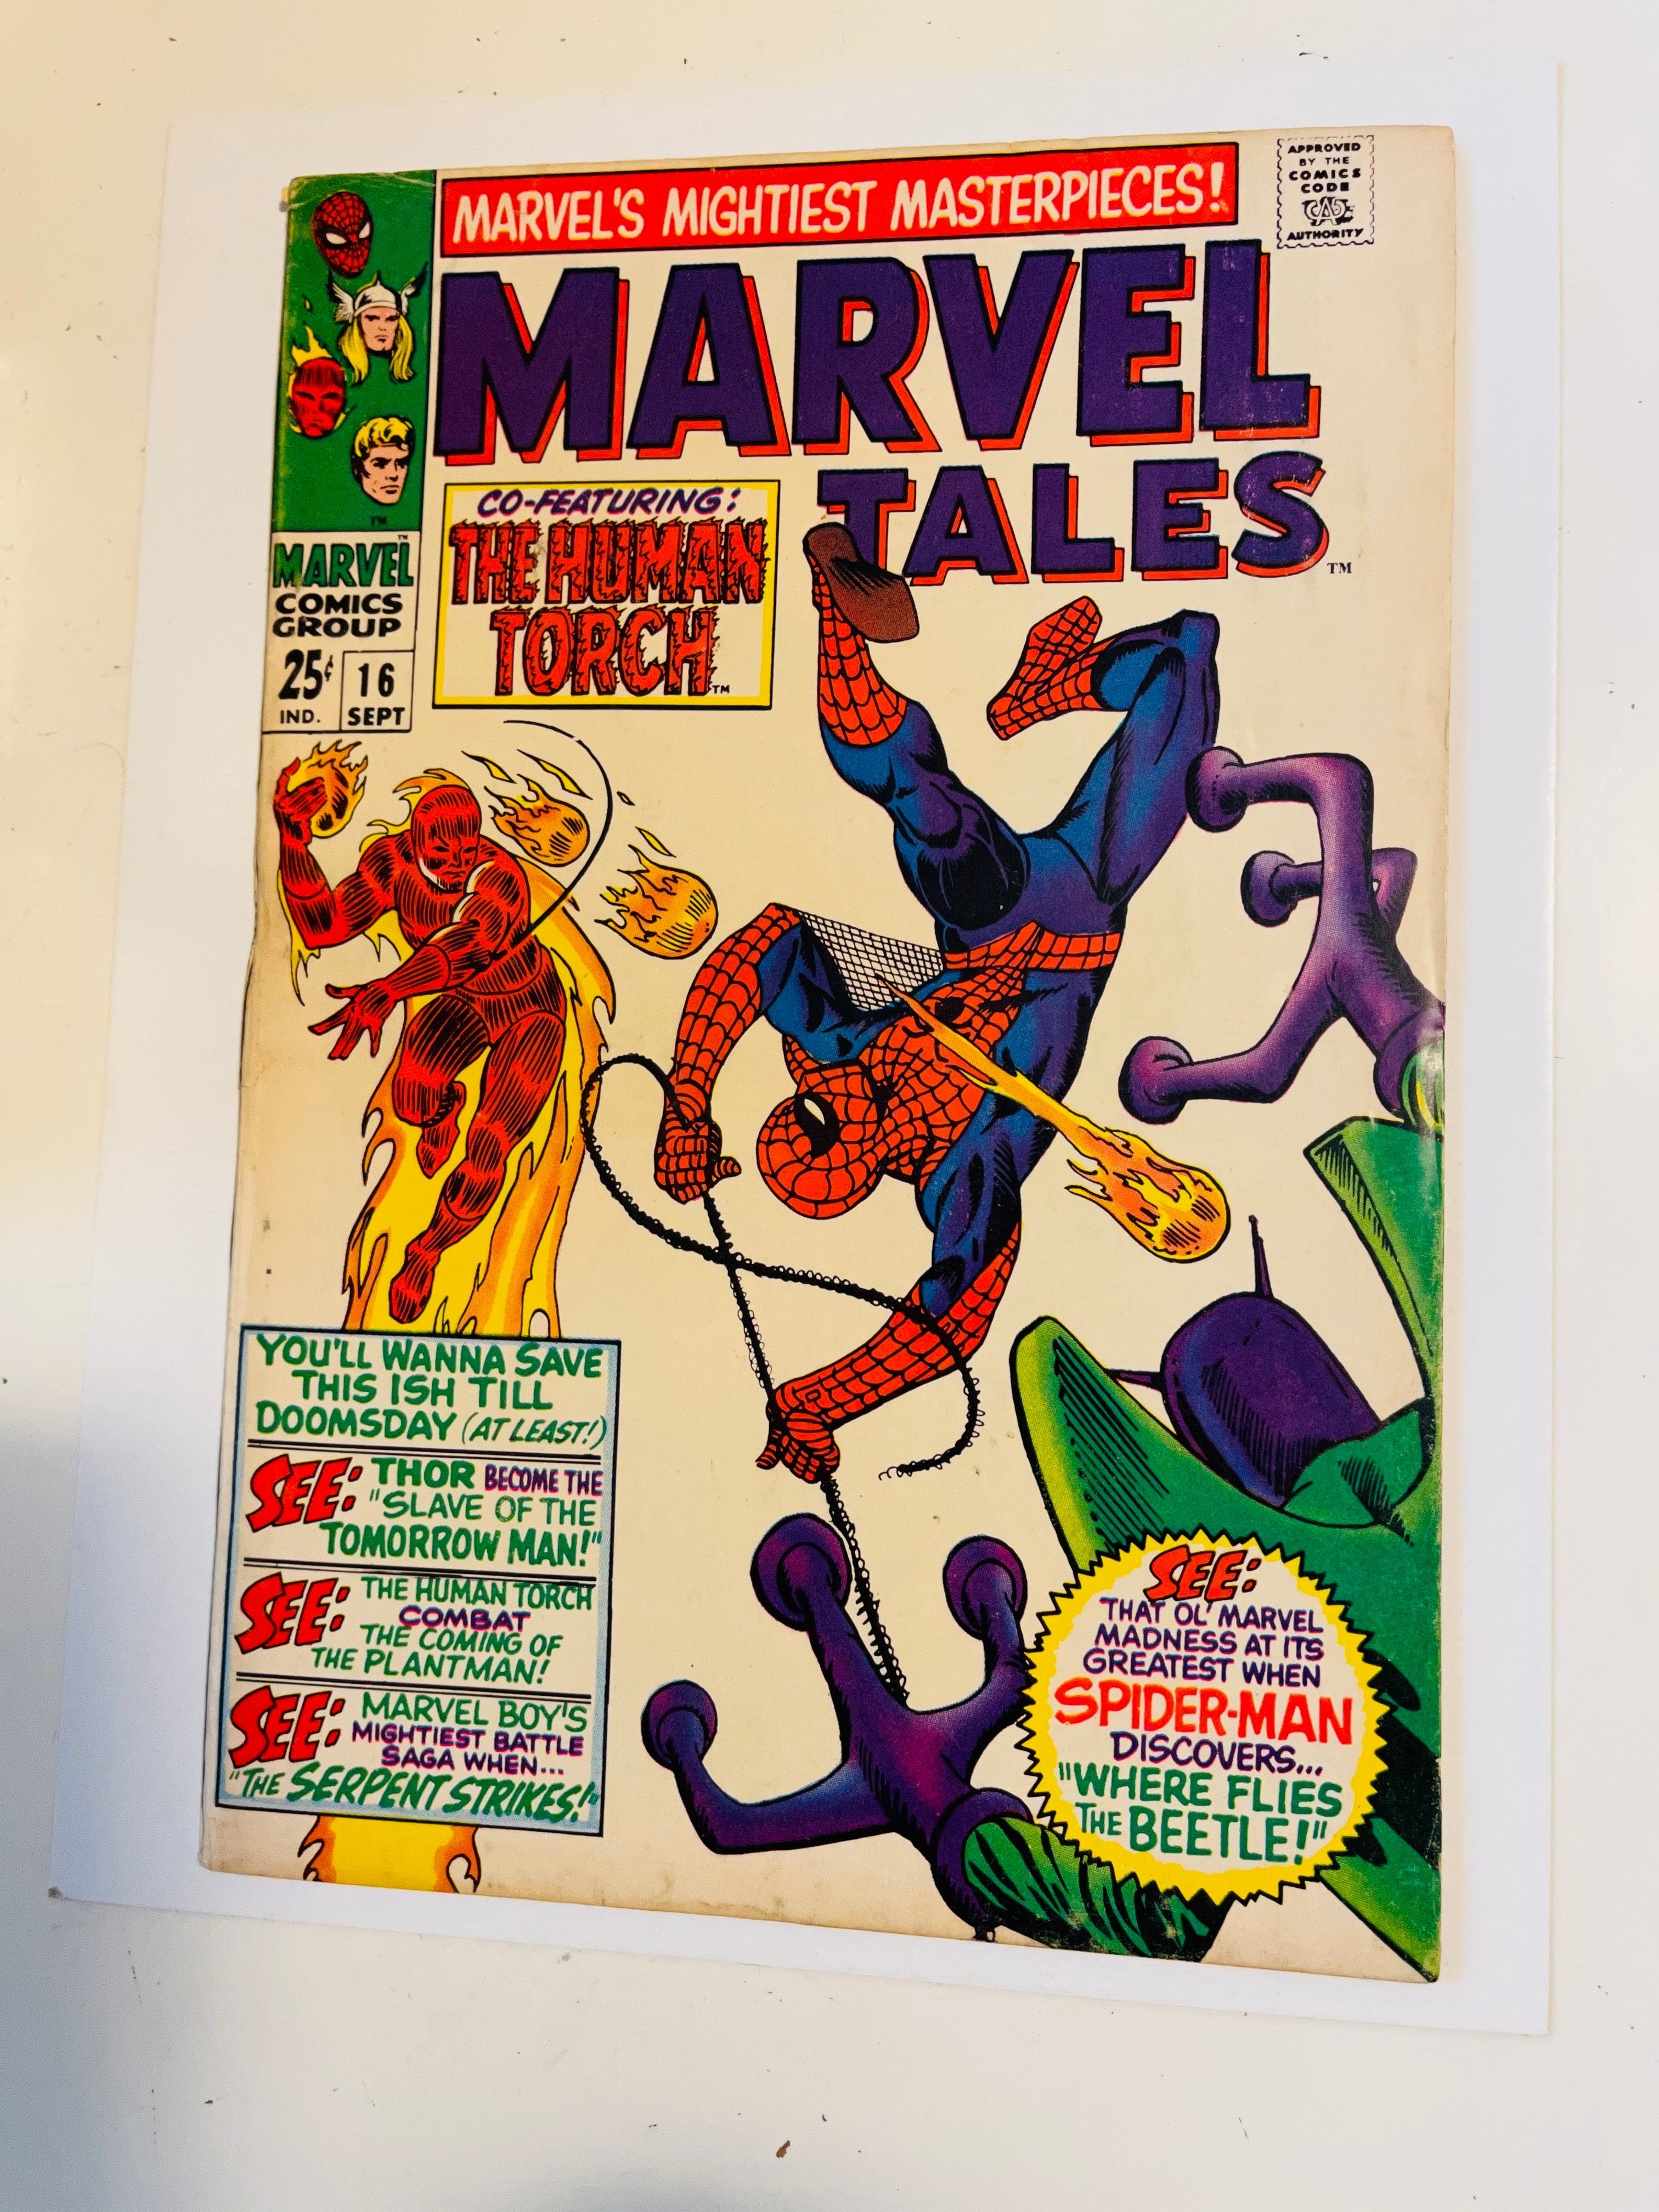 Marvel Tales #16 vg condition comic book 1960s